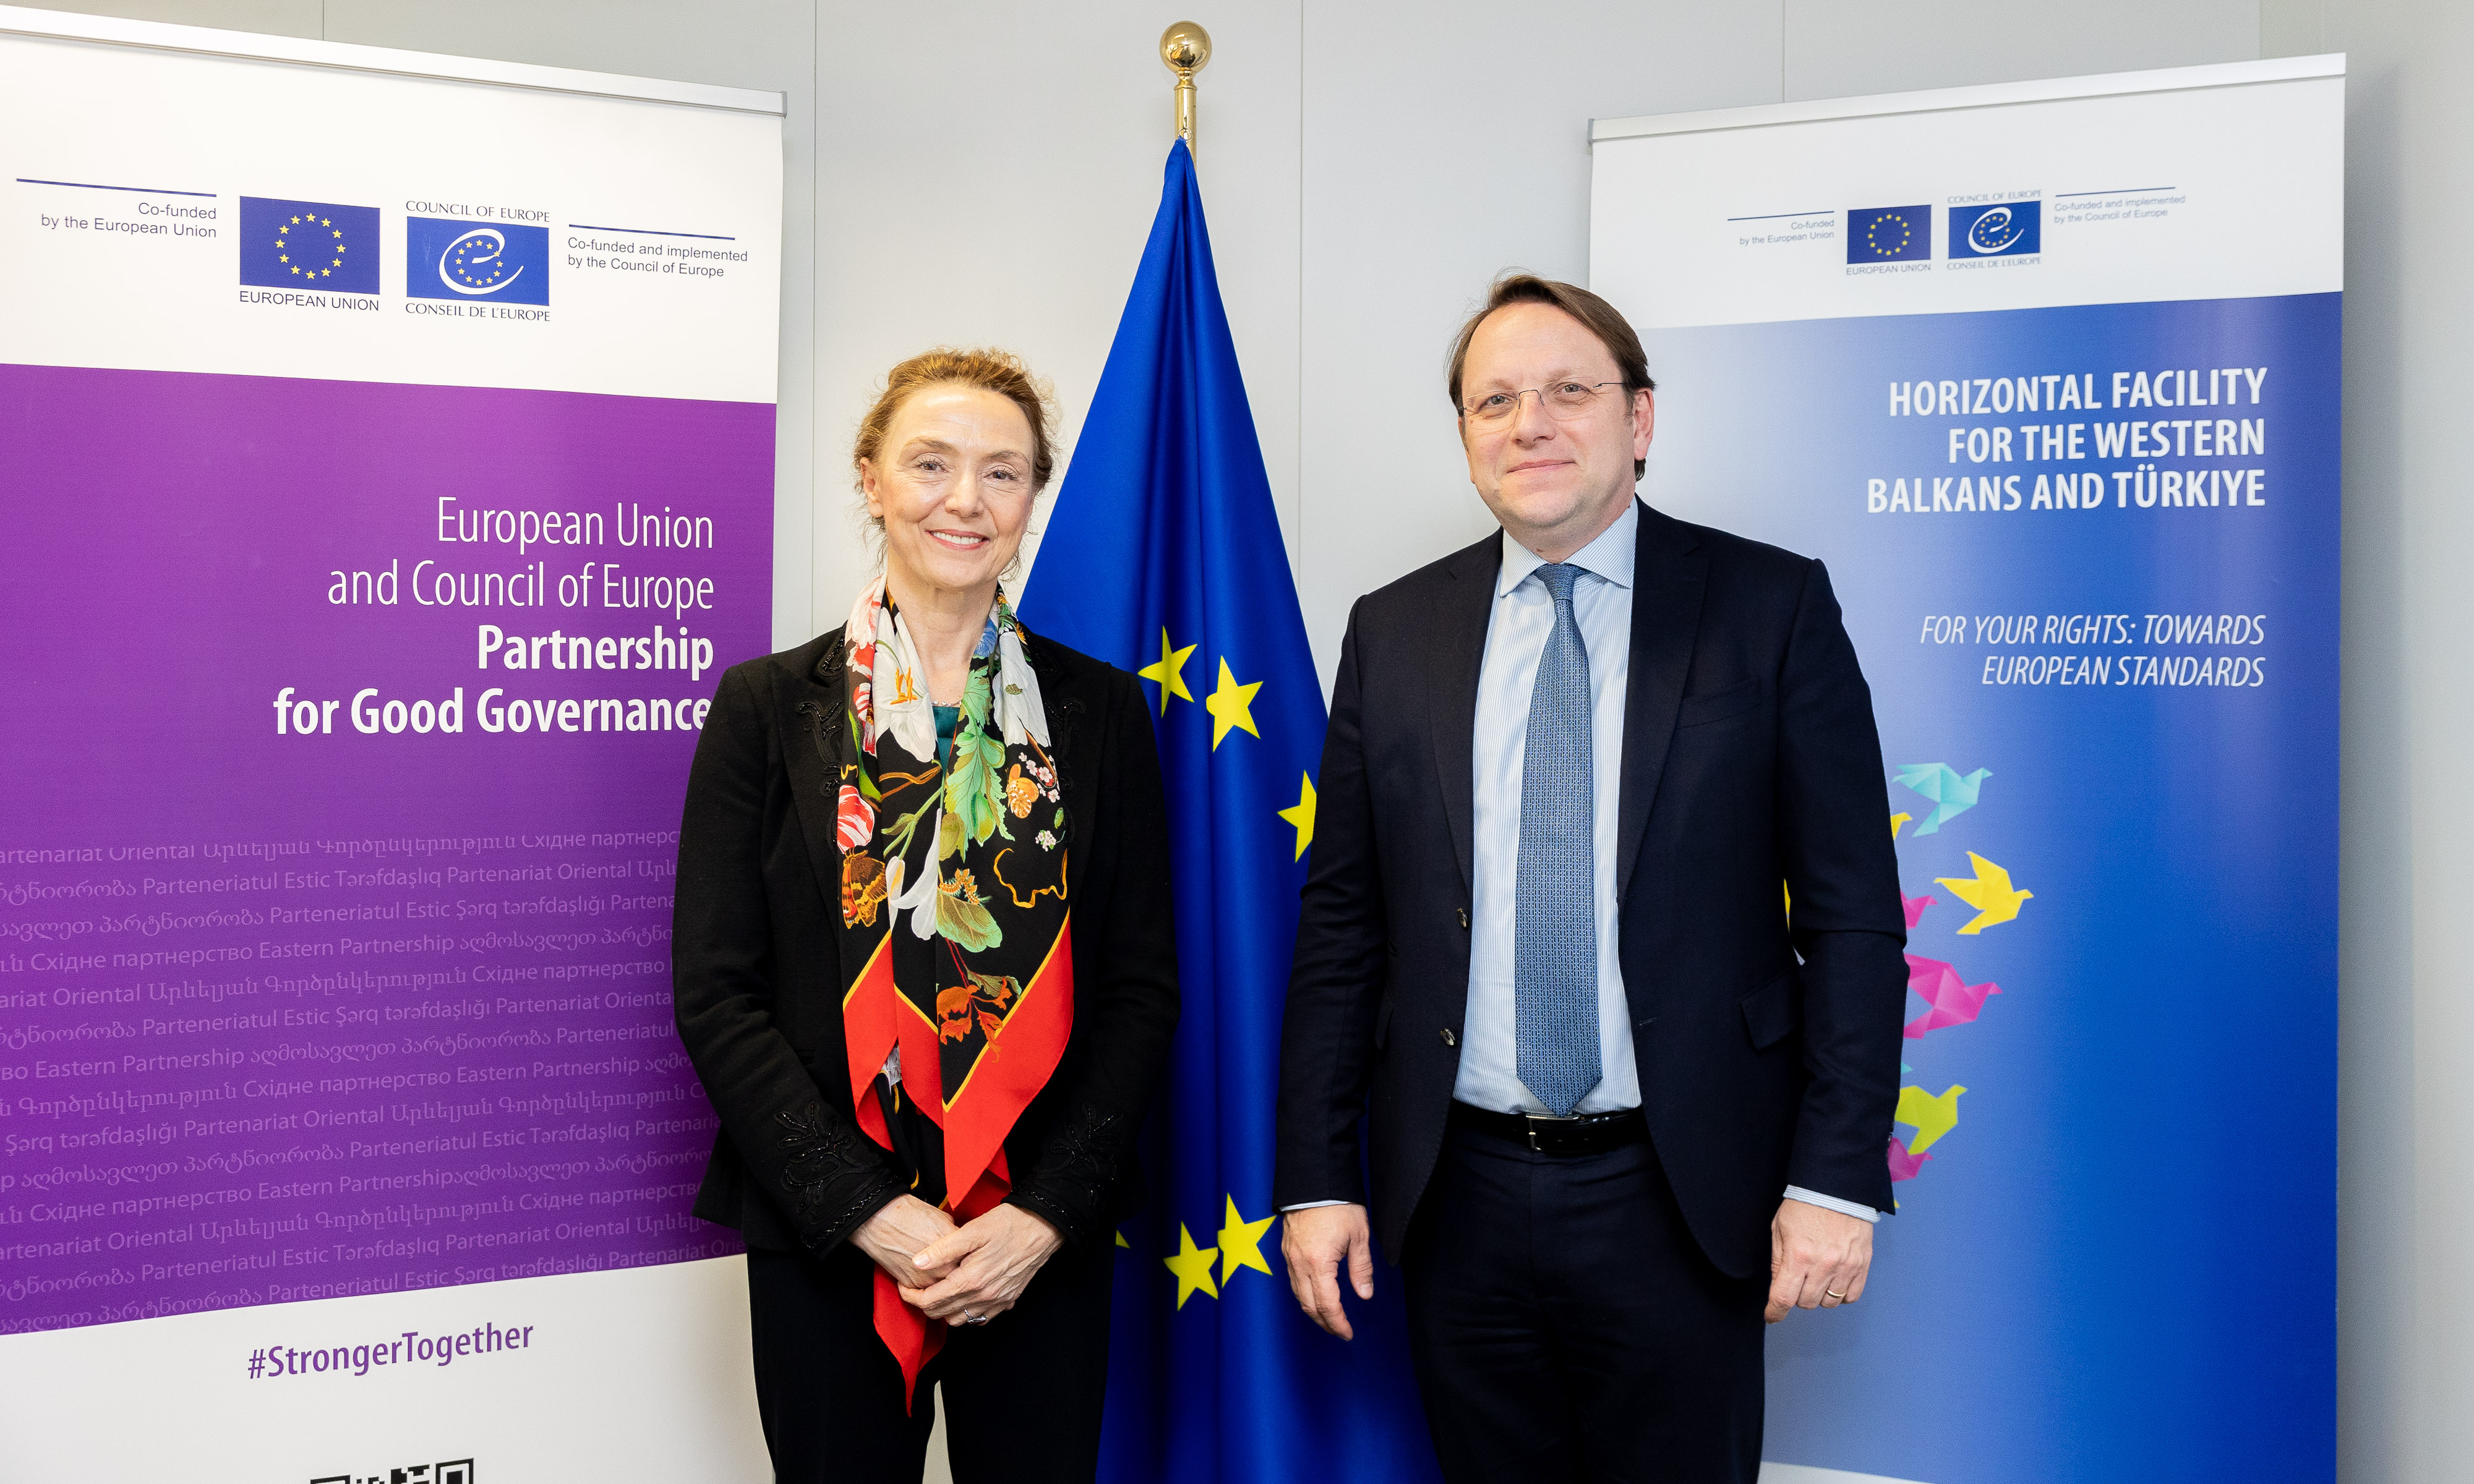 Secretary General and EU Commissioner for Neighbourhood and Enlargement launch two major co-operation programmes between the European Union and the Council of Europe